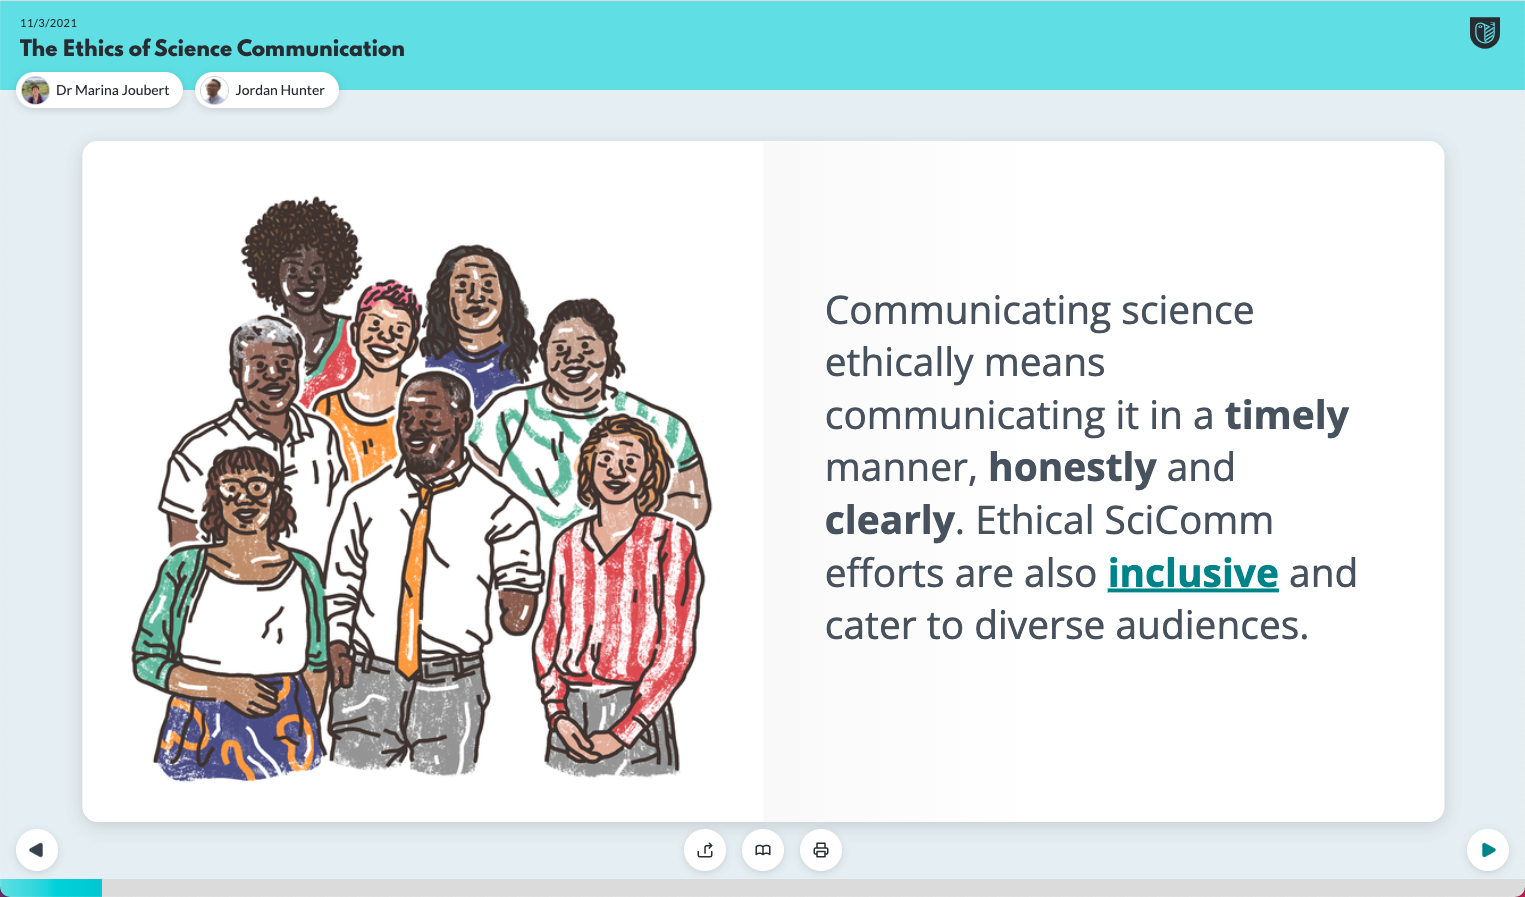 Screenshot from The Ethics of Science Communication course. It reads, “Communicating science ethically means communicating it in a timely manner, honestly, and clearly. Ethical SciComm efforts are also inclusive and cater to diverse audiences.”